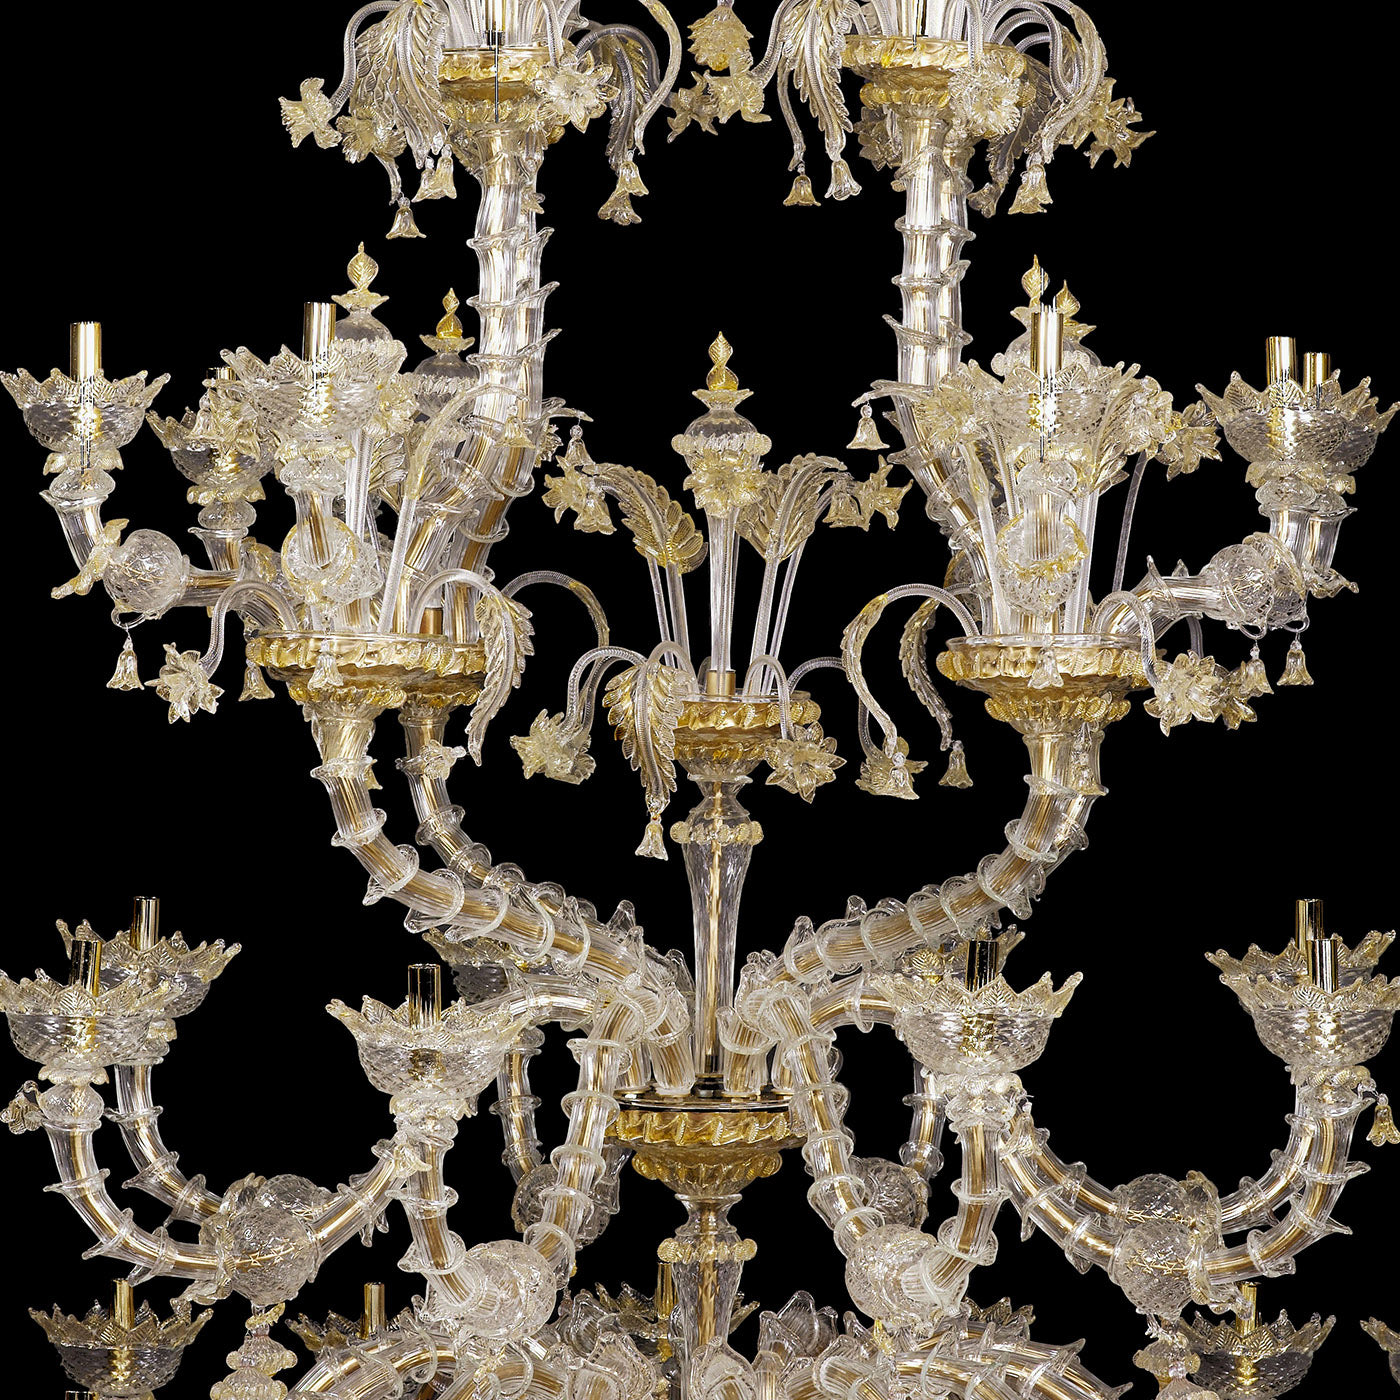 Rezzonico-style Gold and Crystal Chandelier #2 - Alternative view 4